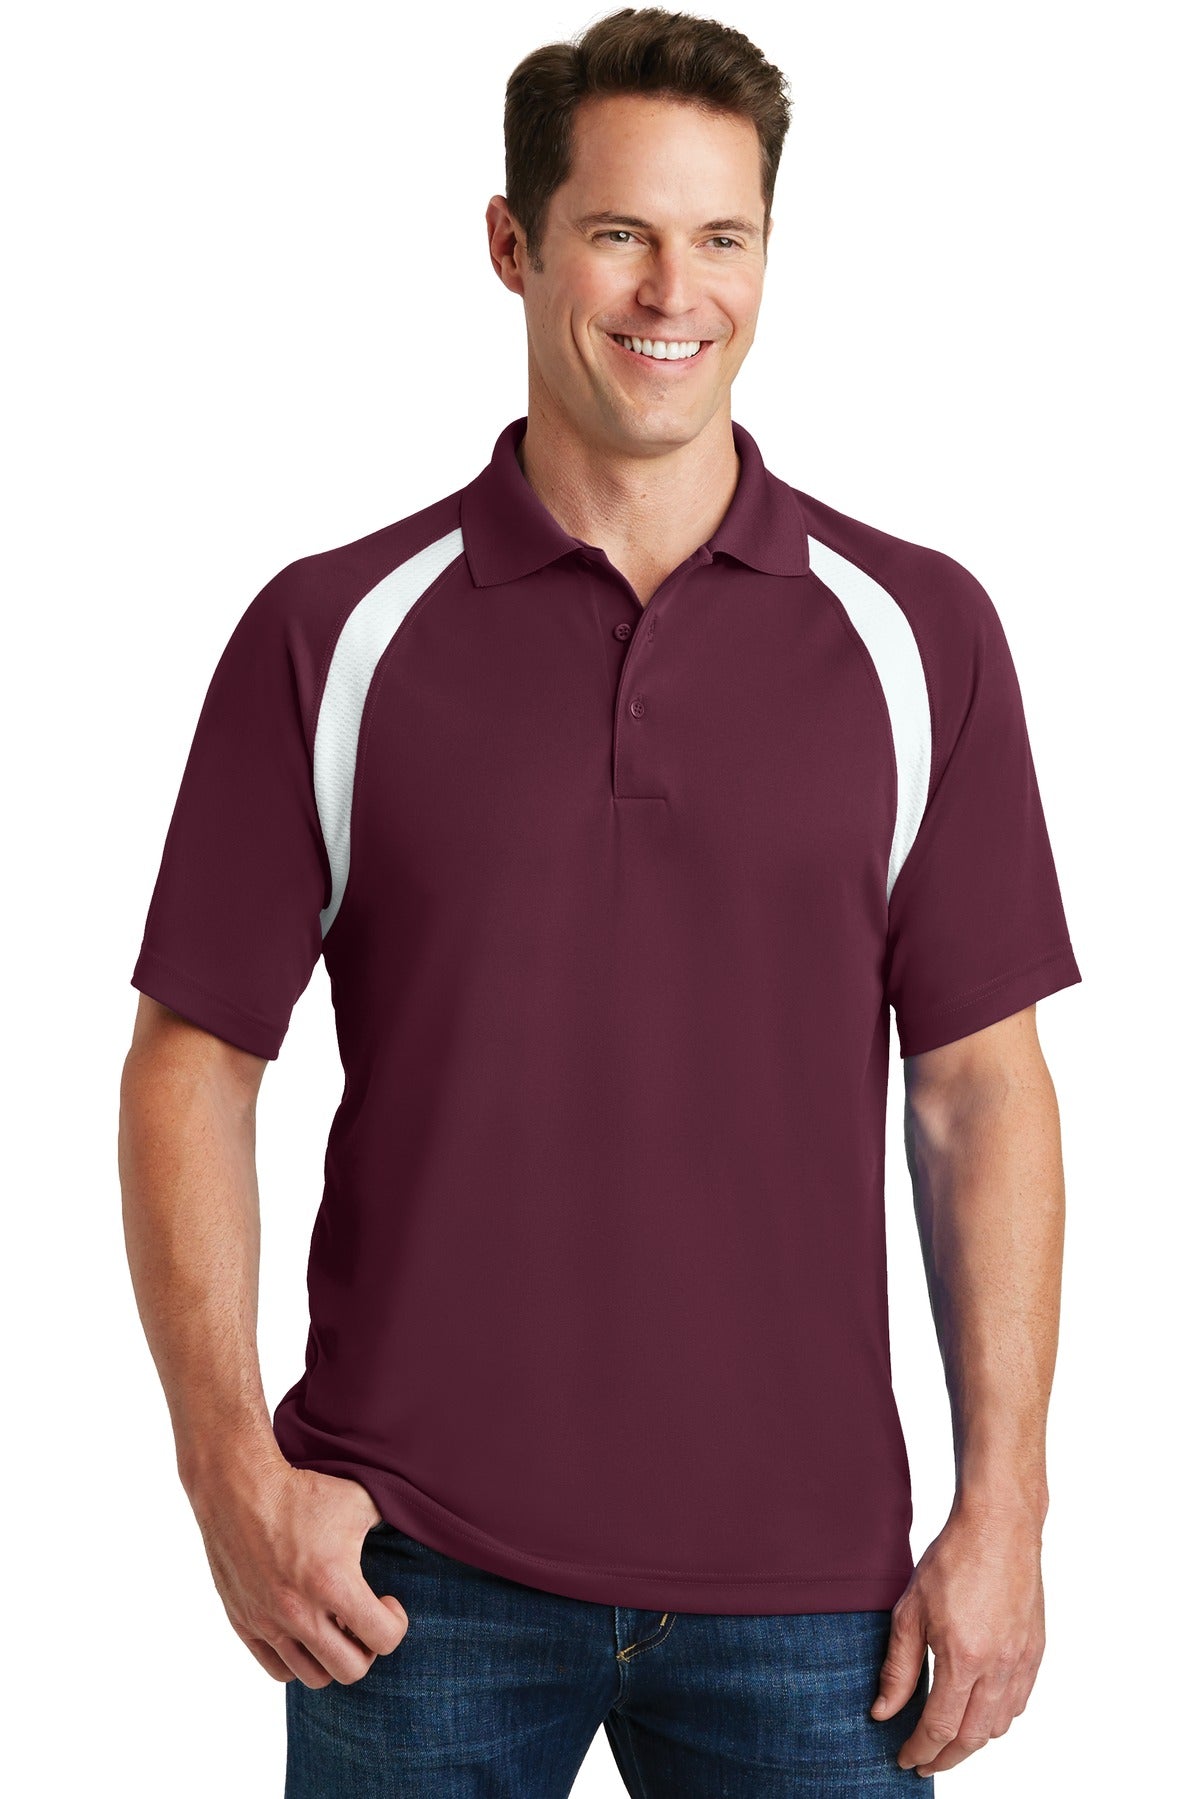 Photo of Sport-Tek Polos/Knits T476  color  Maroon/ White